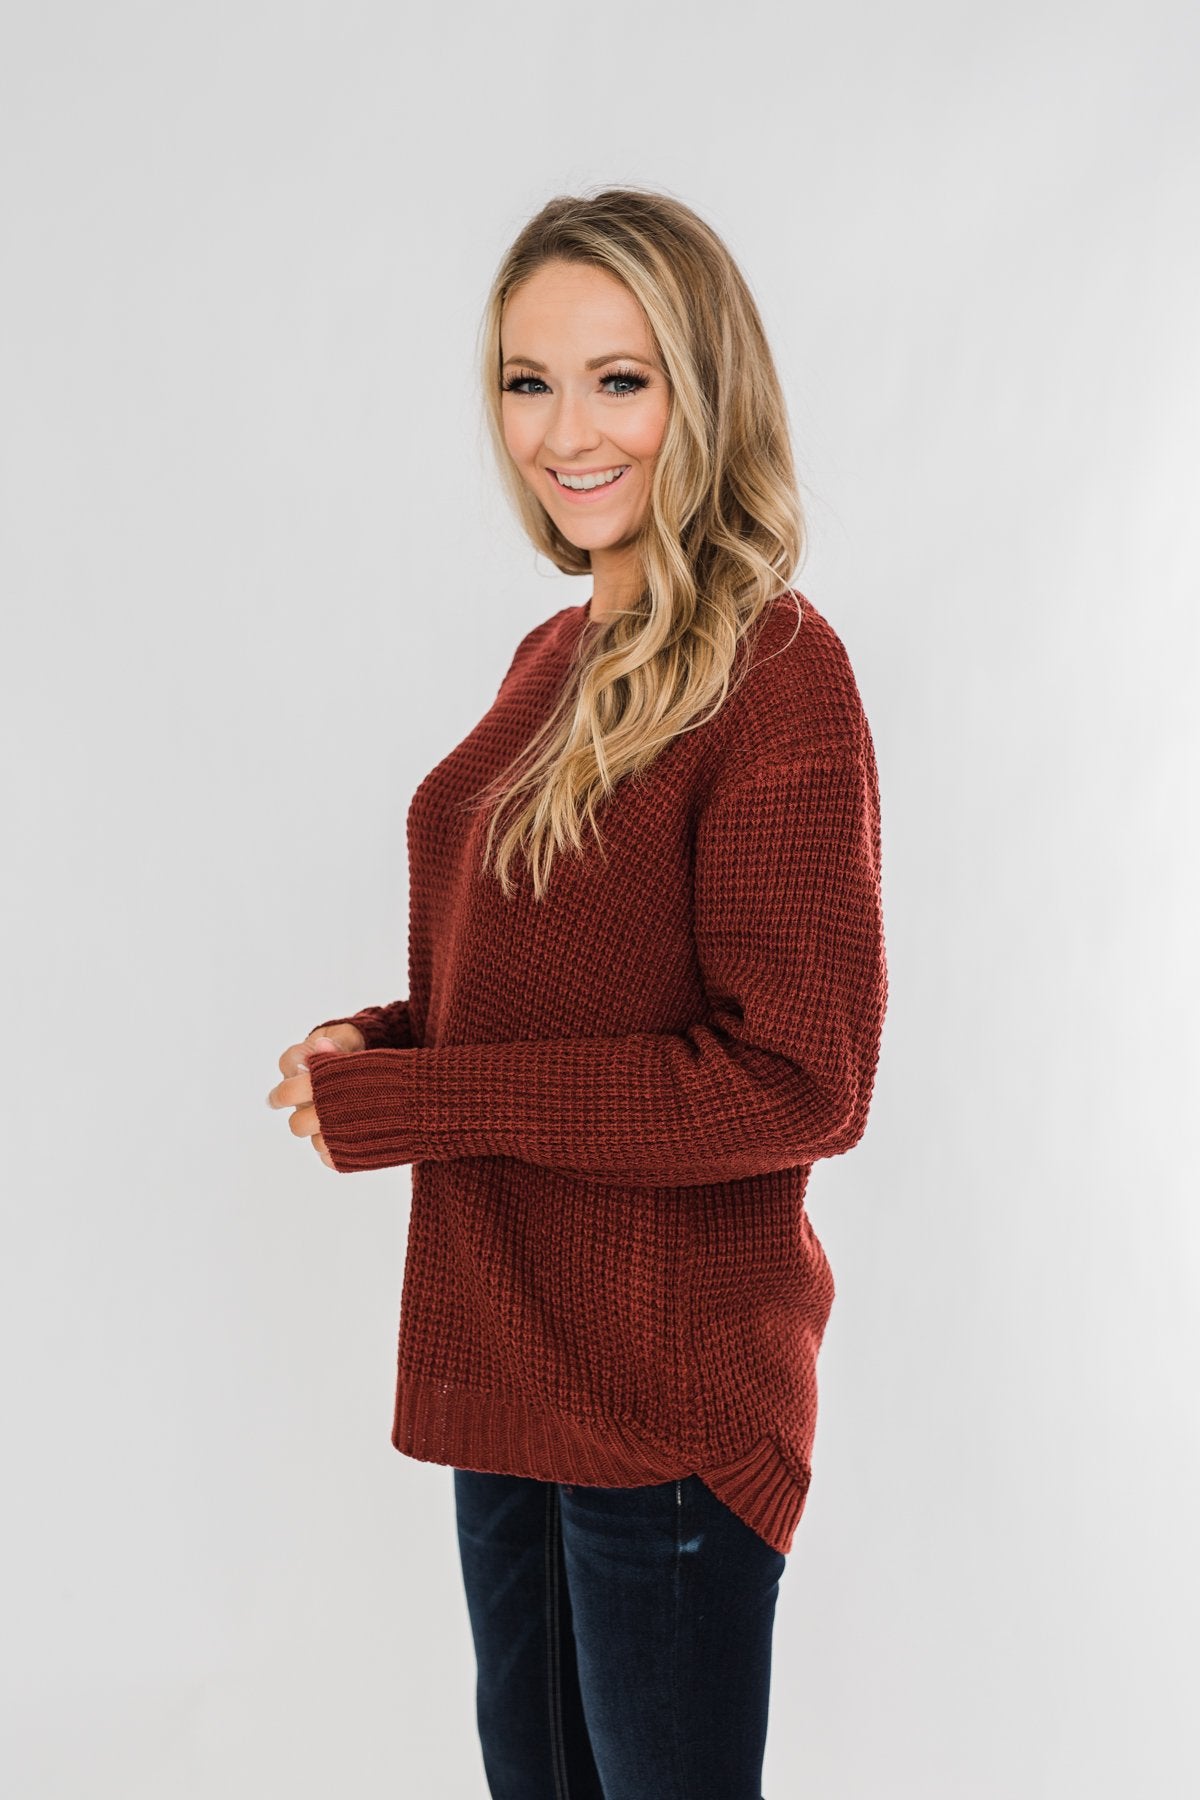 First Look Thick Knit Sweater- Deep Brick